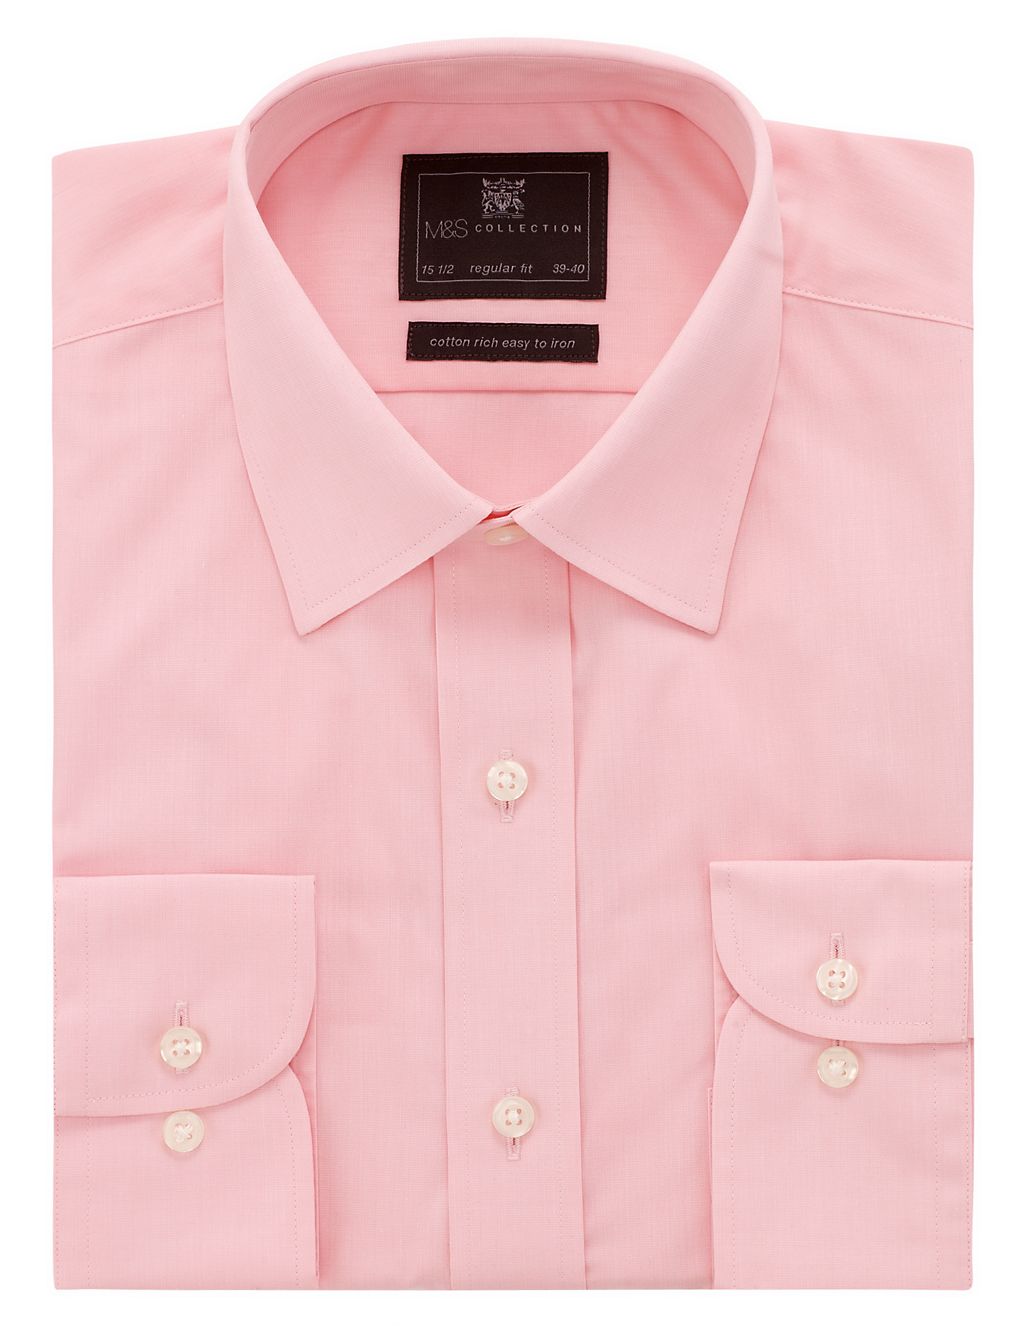 Cotton Rich Easy to Iron Classic Collar Shirt 1 of 1